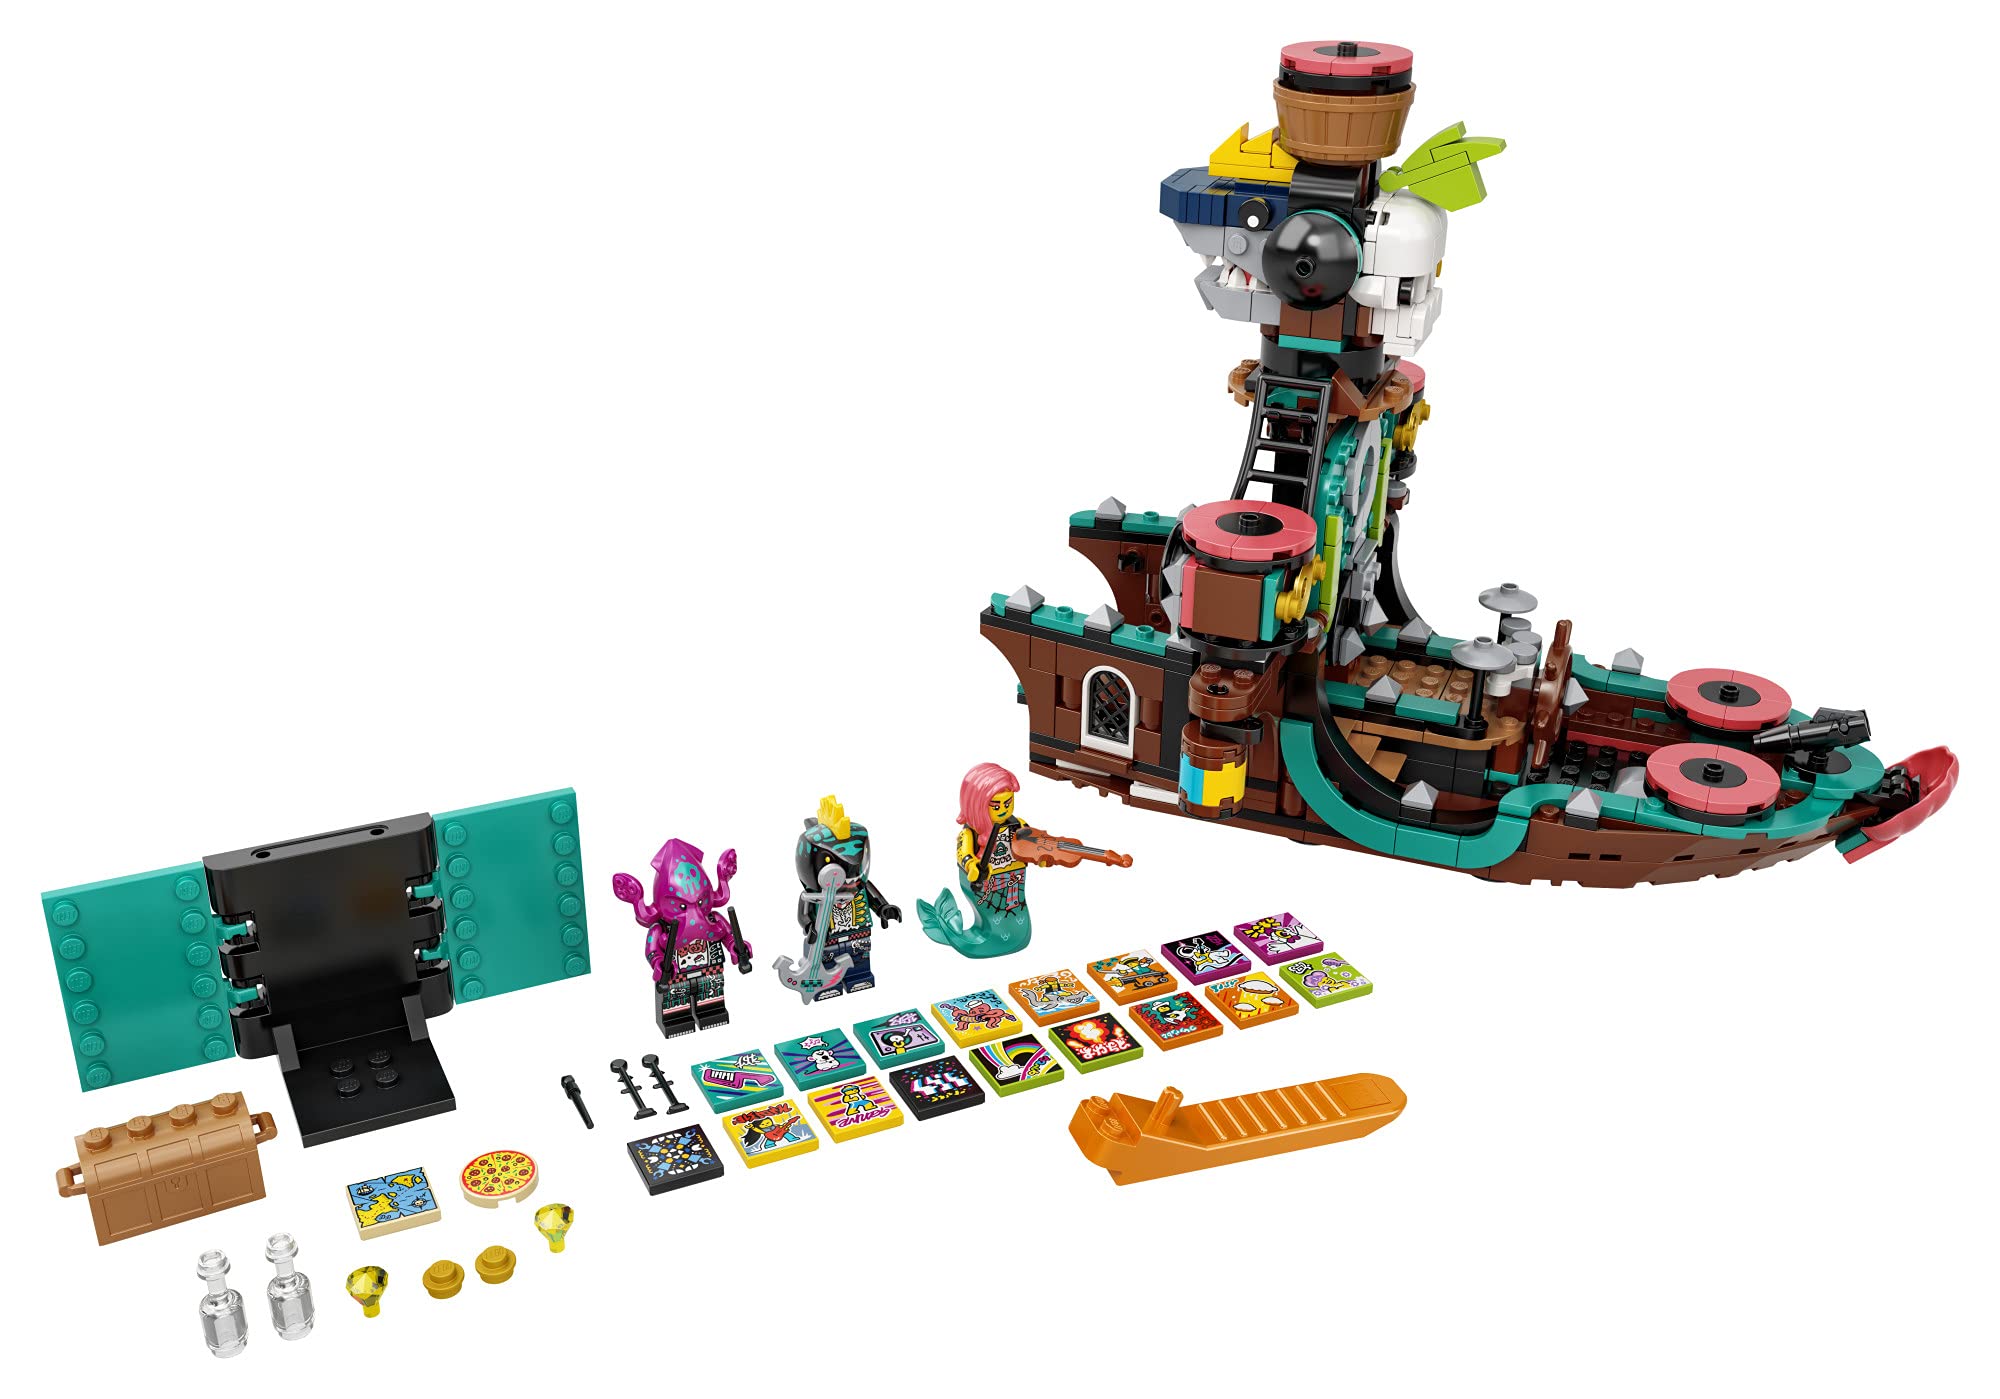 LEGO VIDIYO Punk Pirate Ship 43114 Building Kit Toy; Inspire Kids to Direct and Star in Their Own Music Videos; New 2021 (615 Pieces)